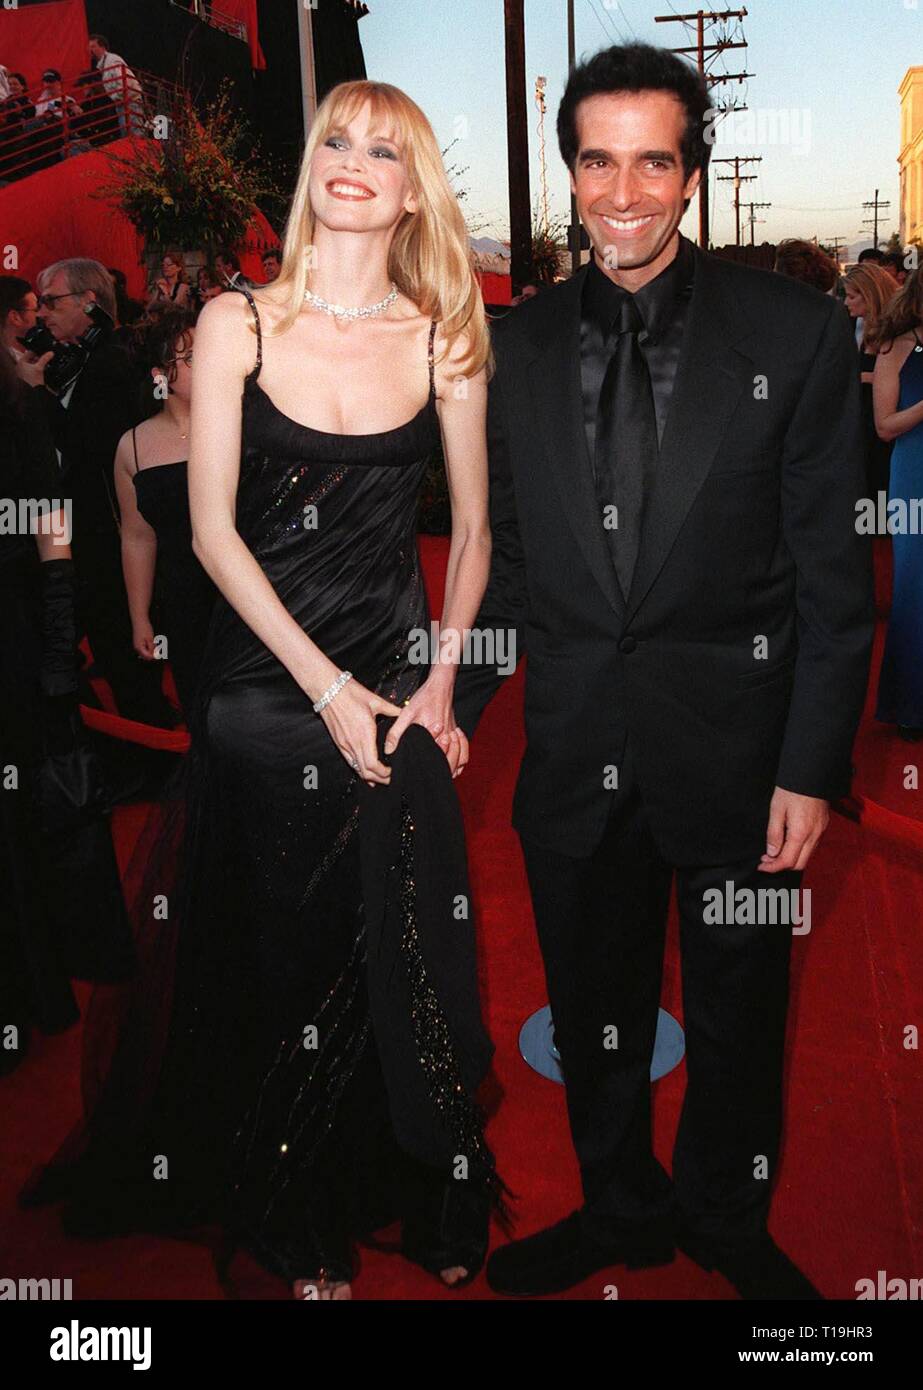 LOS ANGELES, CA - March 23, 1998: Supermodel CLAUDIA SCHIFFER & magician DAVID COPPERFIELD at the 70th Academy Awards. Stock Photo